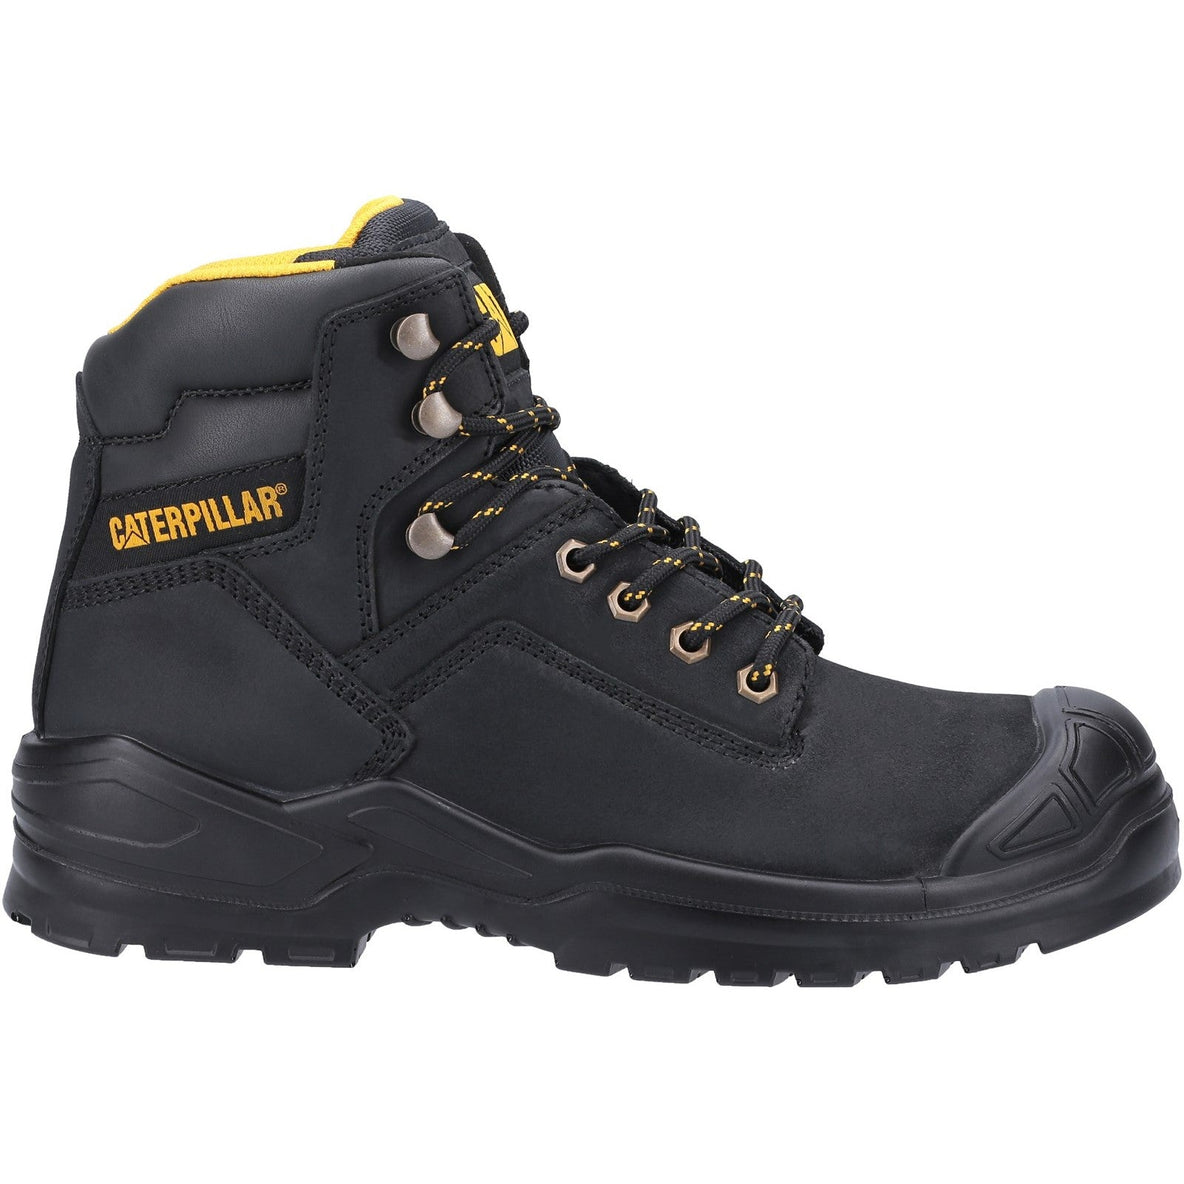 Caterpillar Striver Mid S3 Safety Boot in Black 